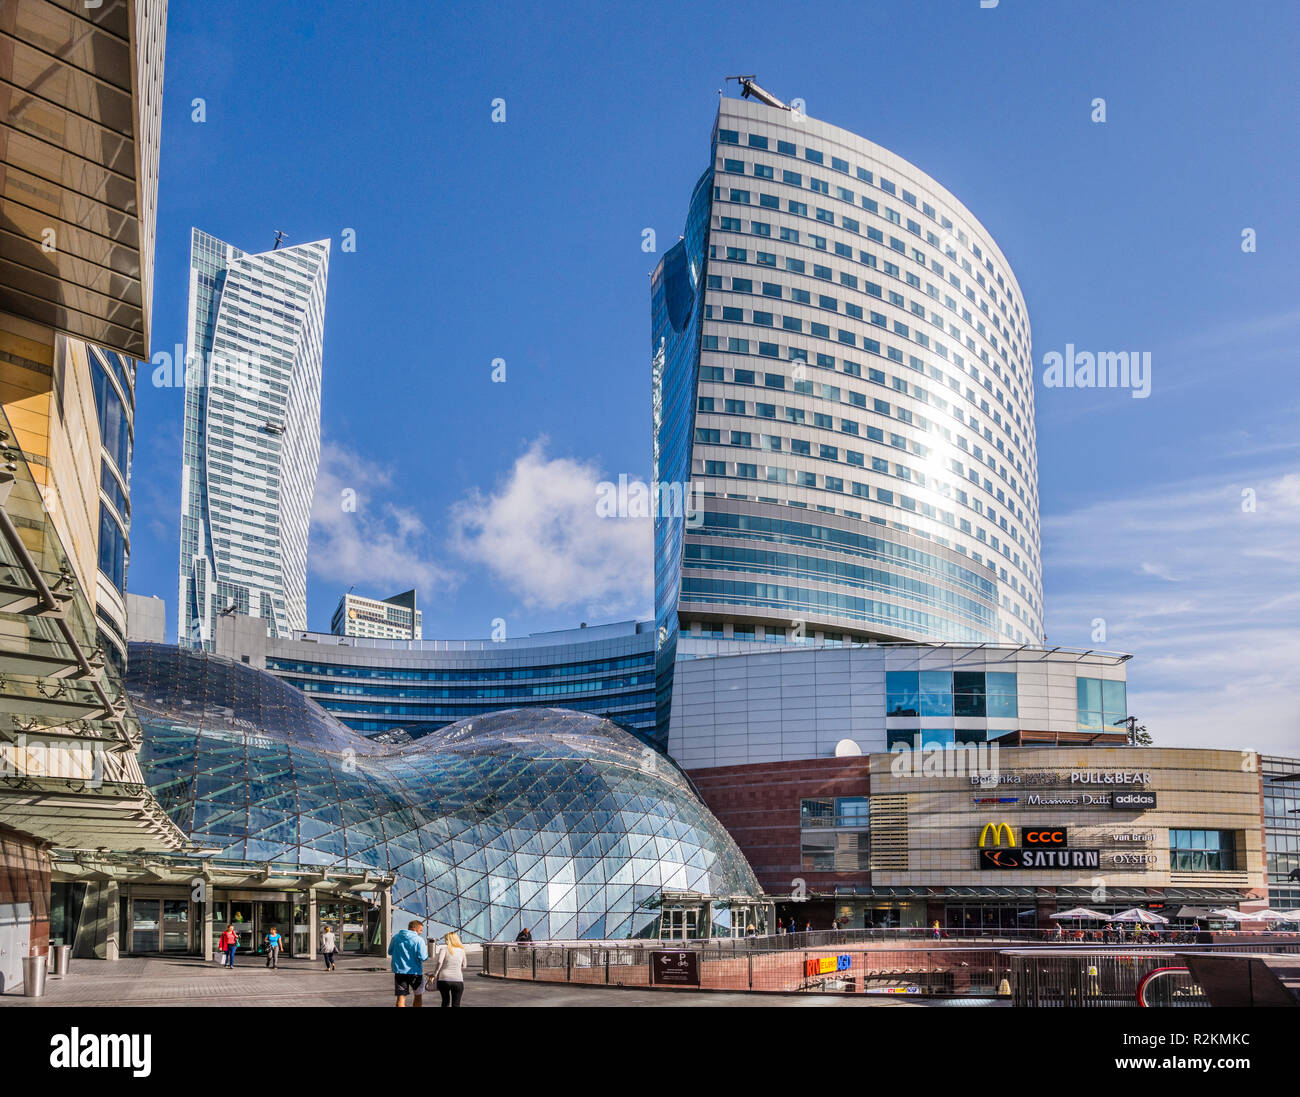 Złote Tarasy (Golden Terraces) shopping and entertainment complex with its signature transparend roof over the central indoor courtyard in central War Stock Photo